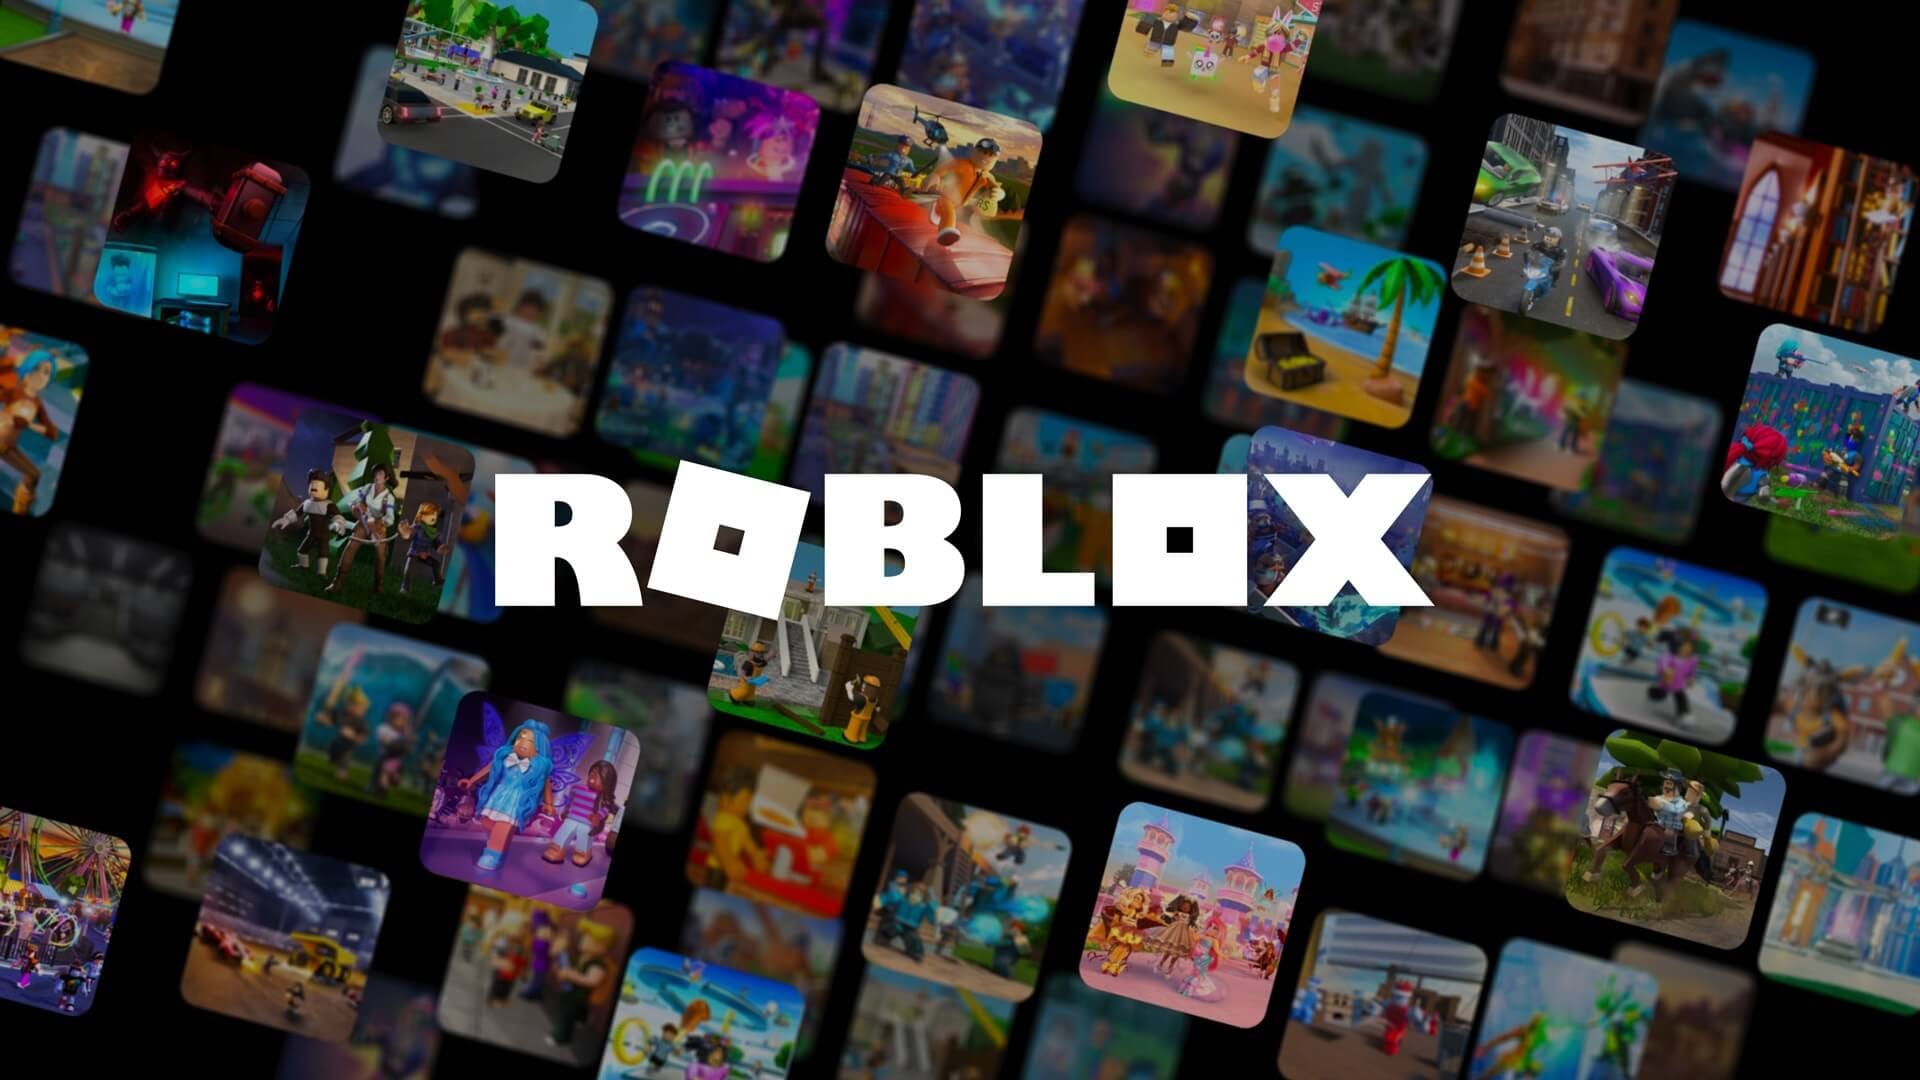 ROBLOX OOF SOUND SEPTEMBER 2006 - JULY 2022 Liked by